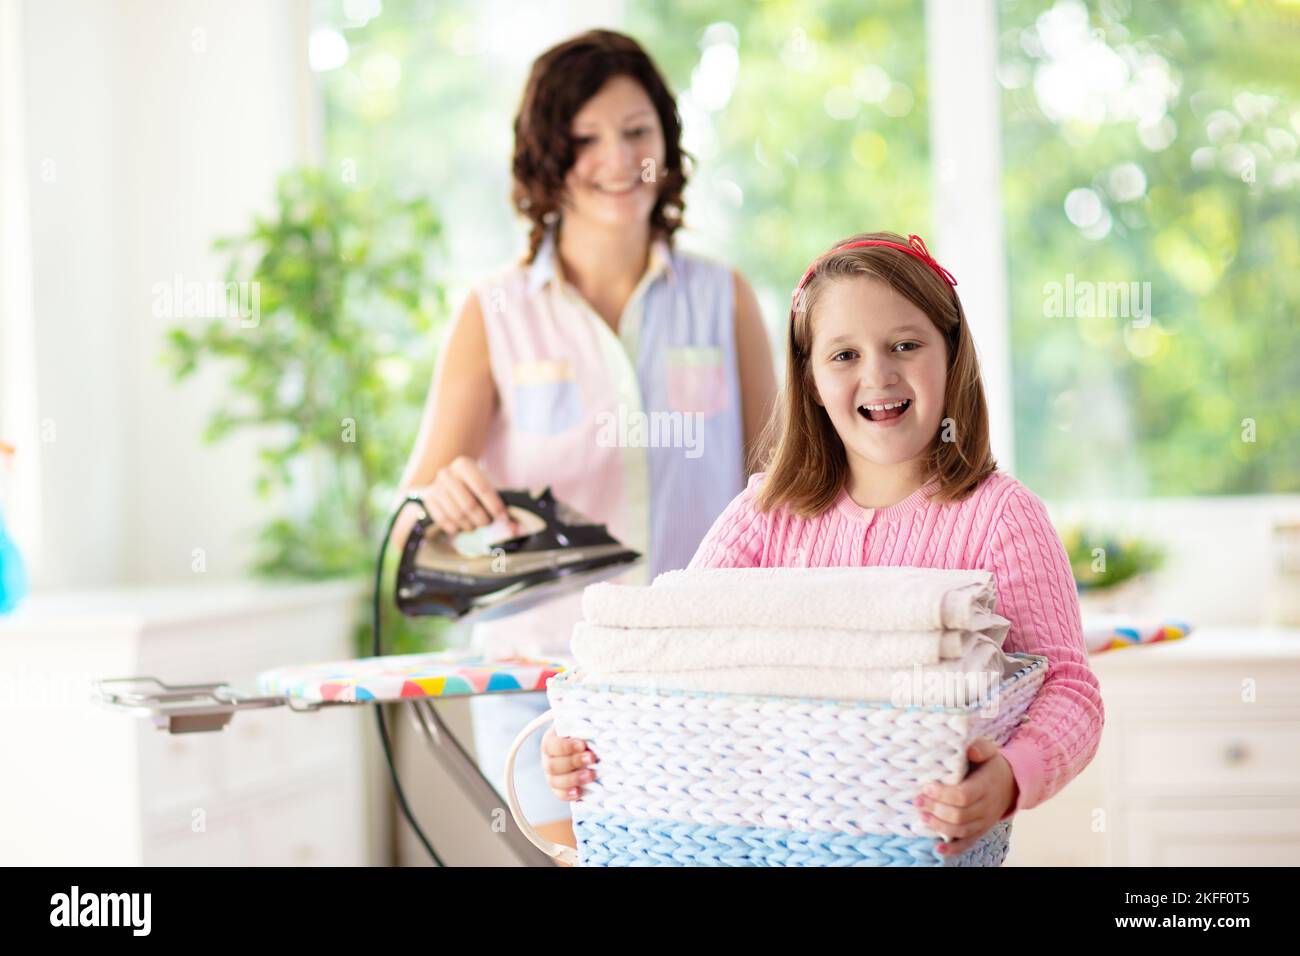 Woman and child ironing clothes. Mother and daughter folding clothes at iron board. Mom and kid cleaning house. Home chores. Stock Photo